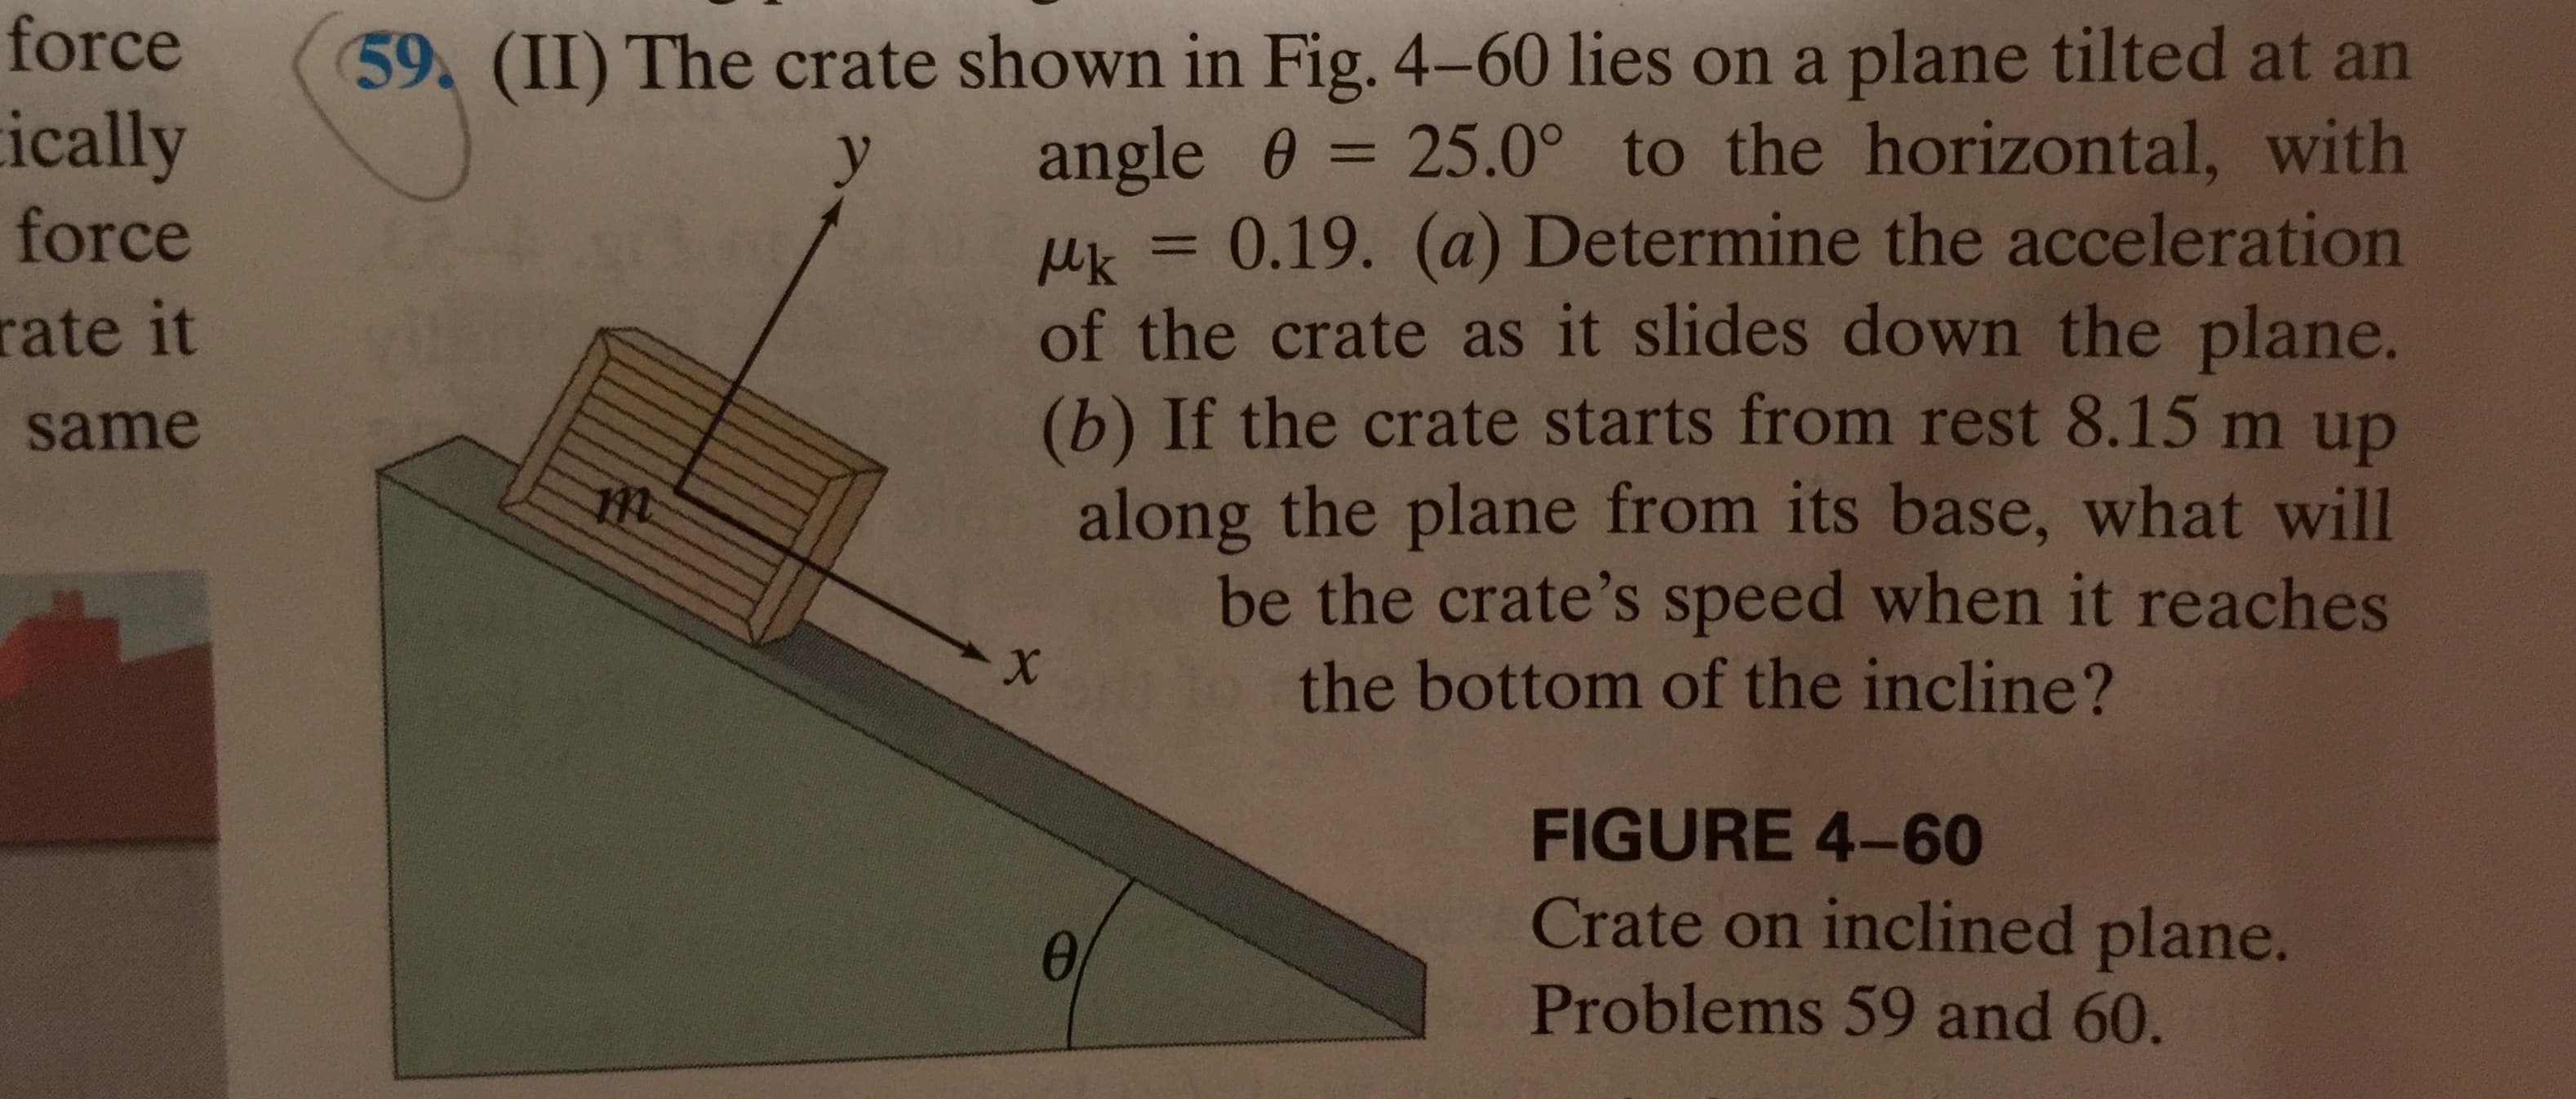 force
(59
ically
(II) The crate shown in Fig. 4-60 lies on a plane tilted at an
angle 0 25.0° to the horizontal, with
uk0.19. (a) Determine the acceleration
of the crate as it slides down the plane.
(b) If the crate starts from rest 8.15 m up
along the plane from its base, what will
be the crate's speed when it reaches
the bottom of the incline?
y
force
rate it
same
X
FIGURE 4-60
Crate on inclined plane.
Problems 59 and 60.
